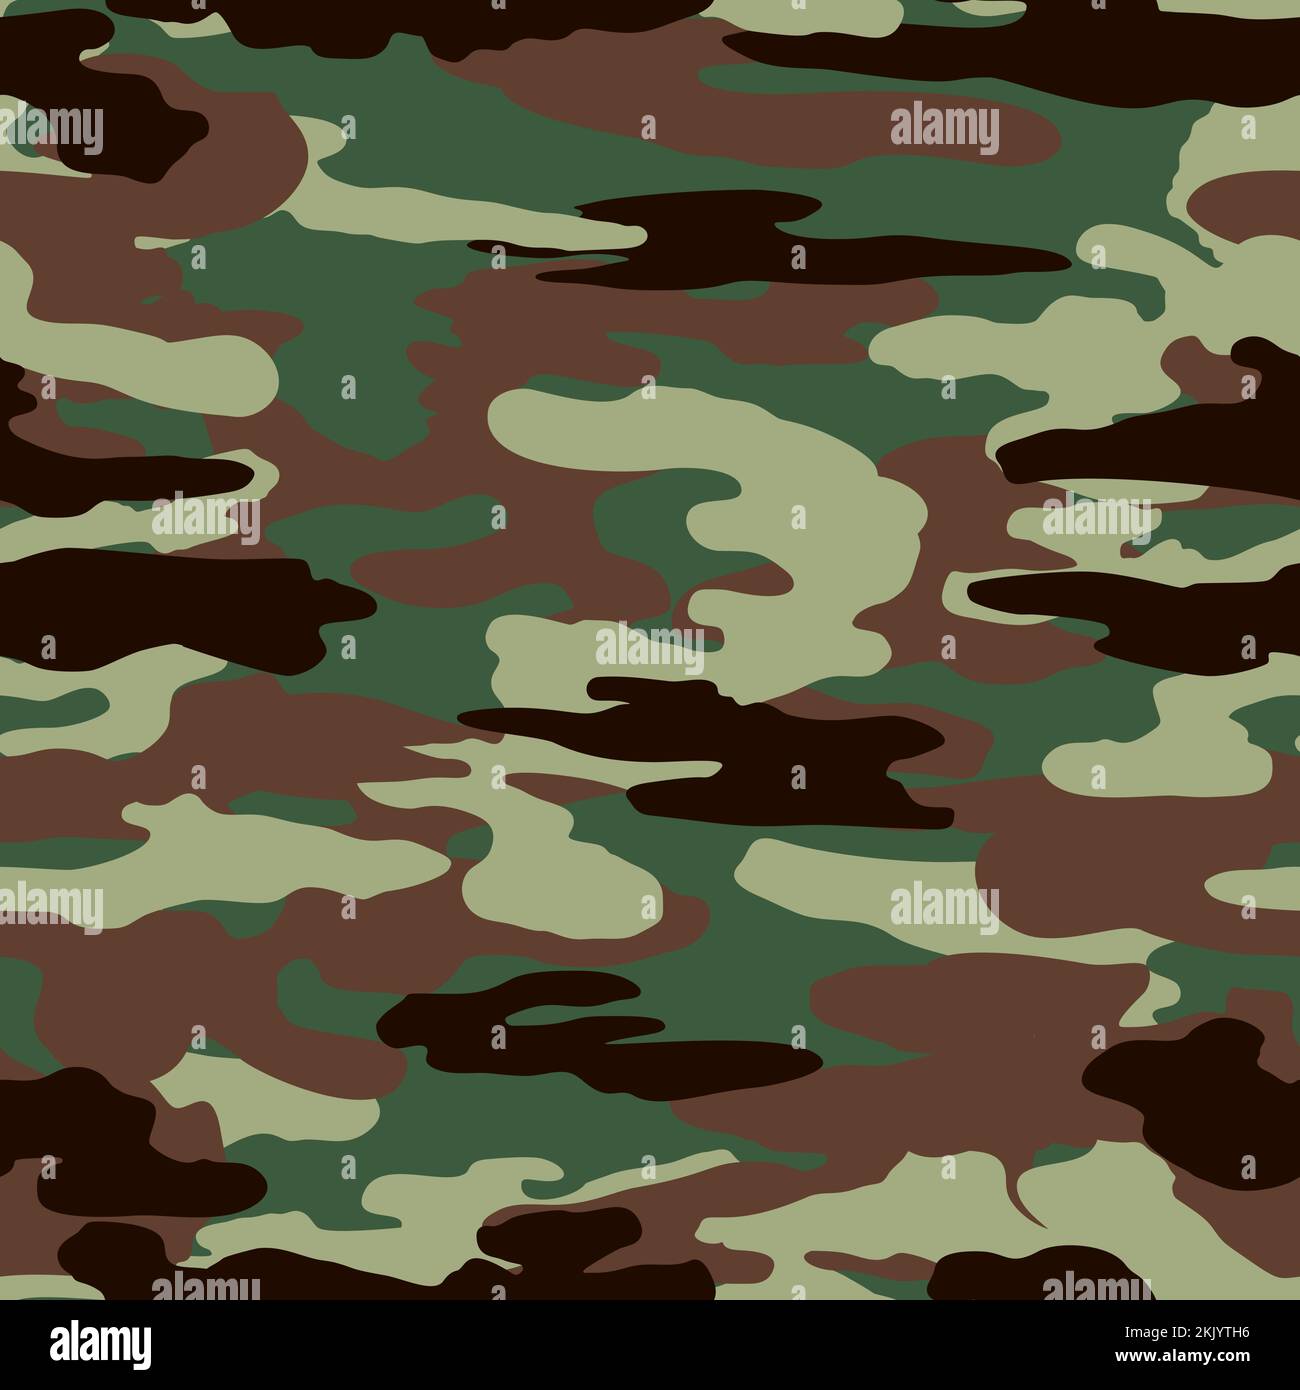 Camouflage Military Army Camo Pattern Background Stock Vector